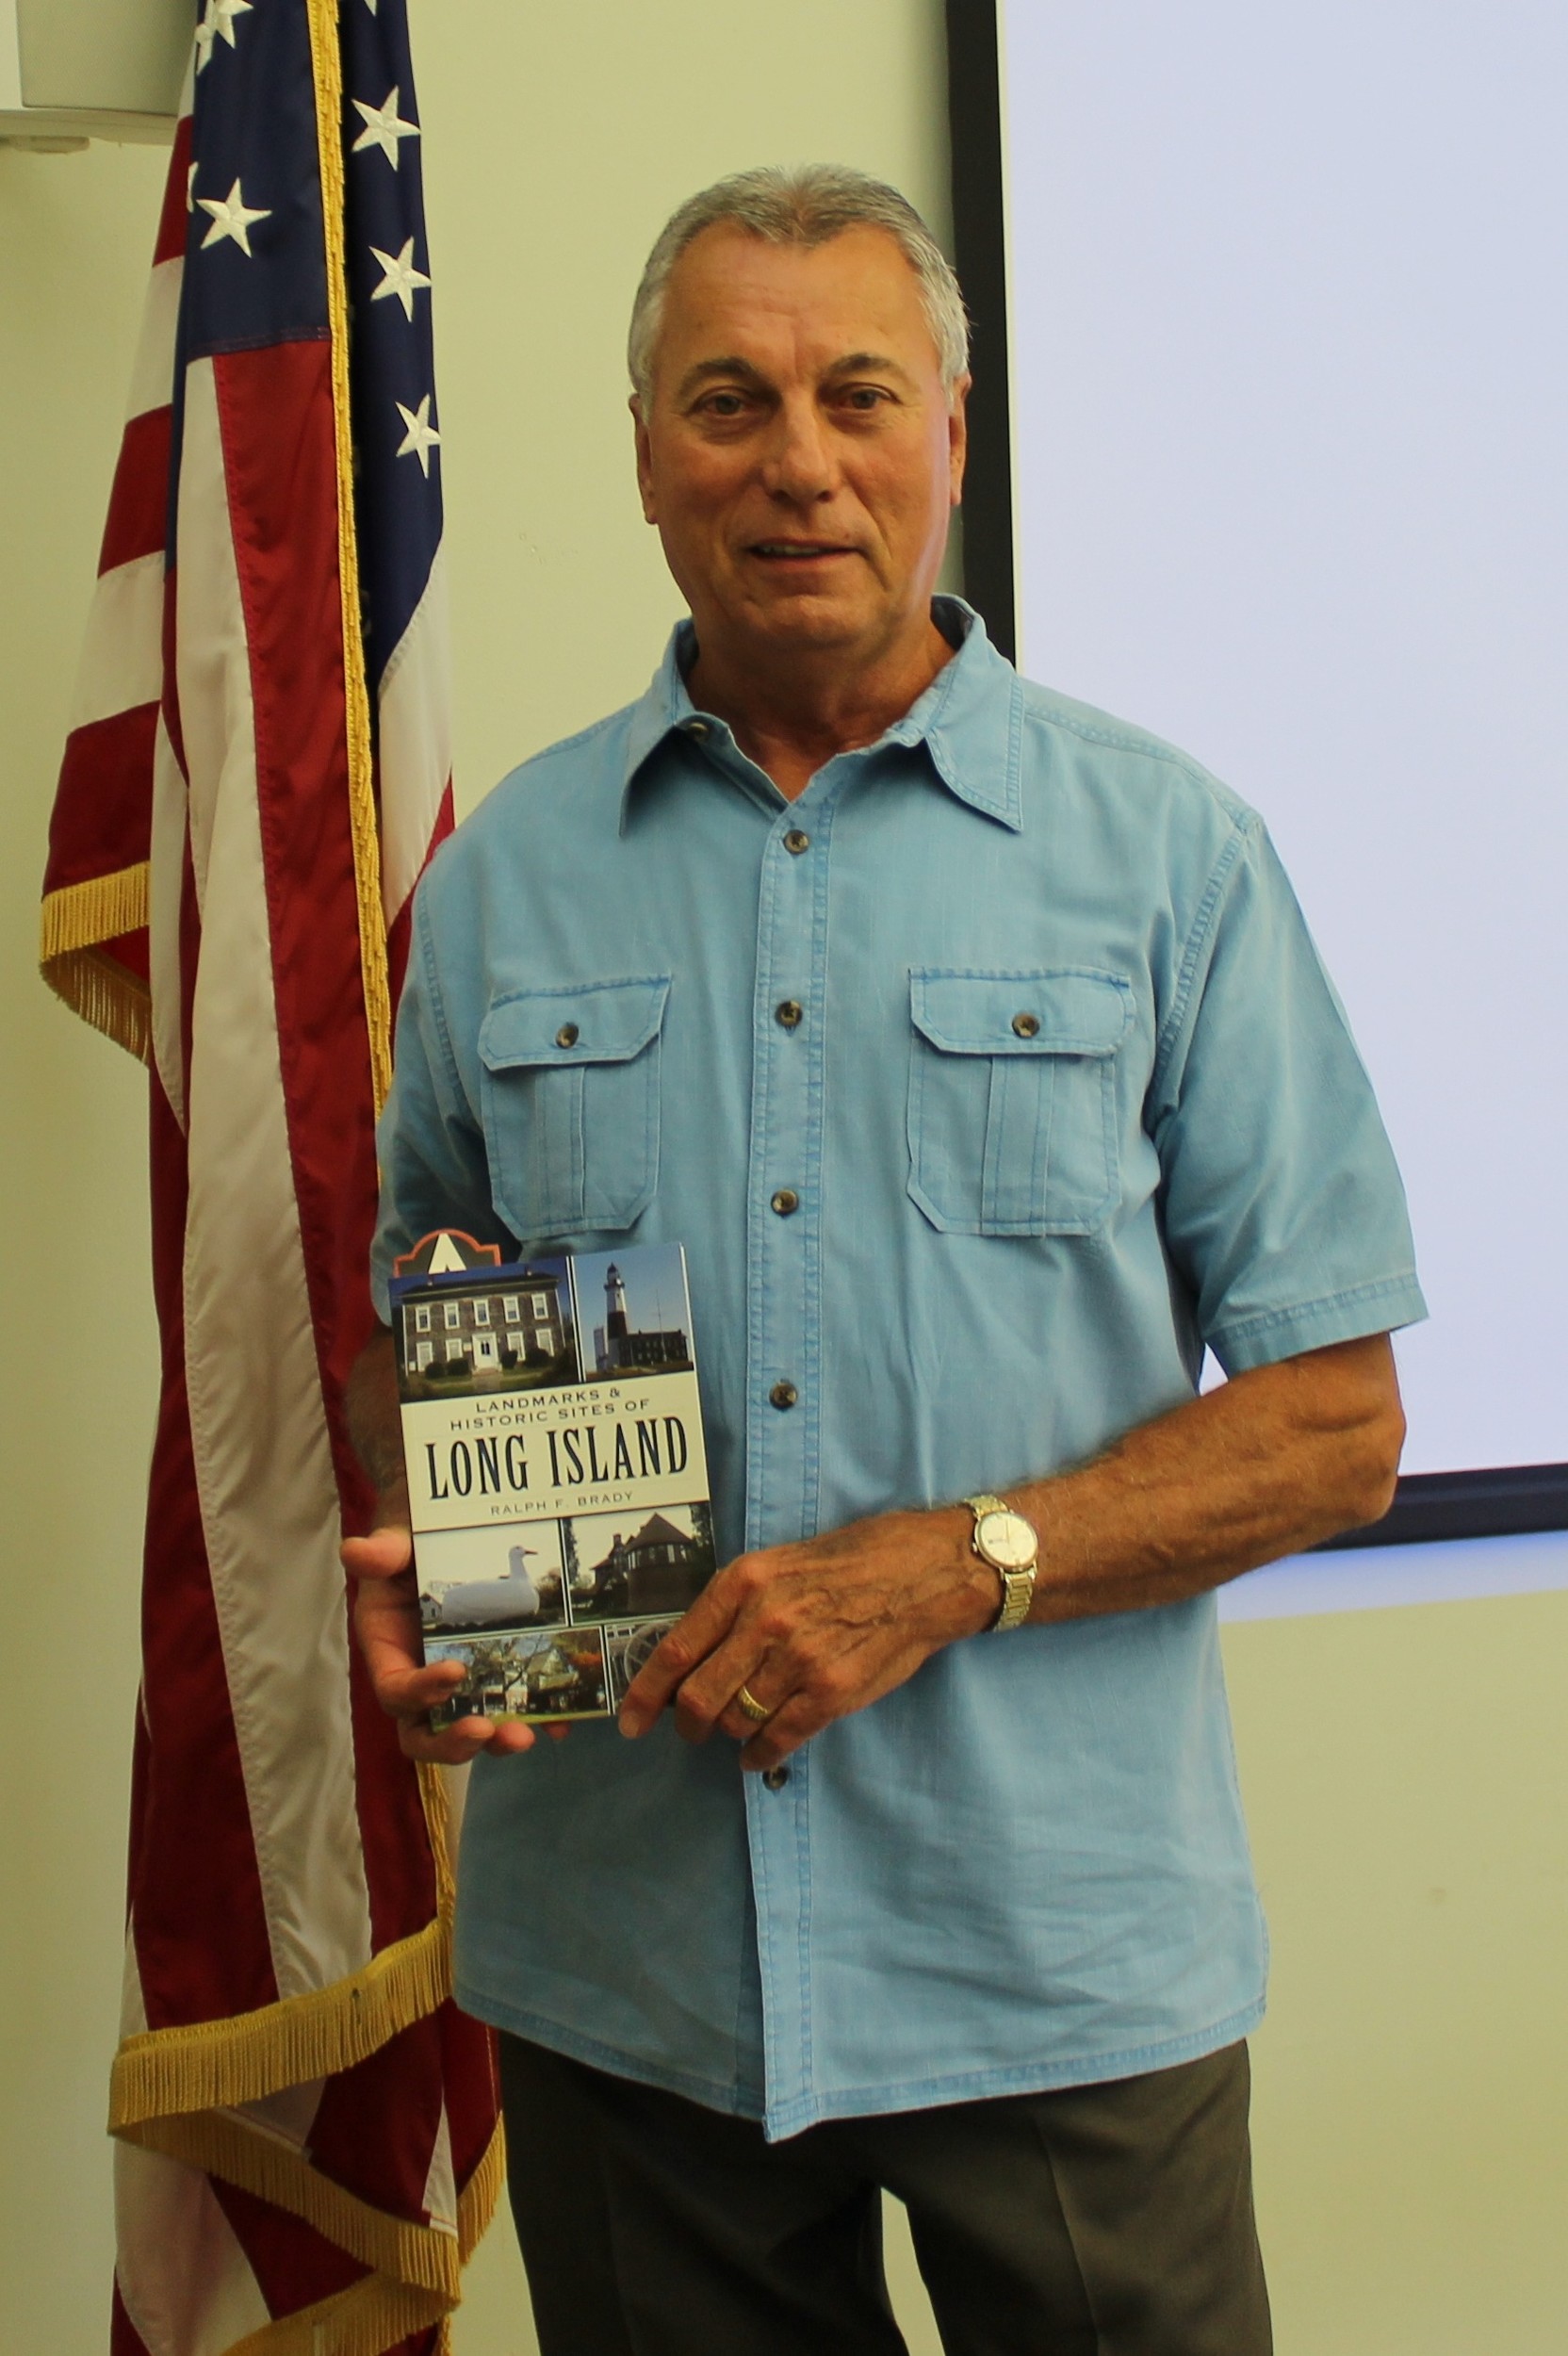 Author Ralph Brady donated his book about  Long Island’s history to the Wantagh Public Library.